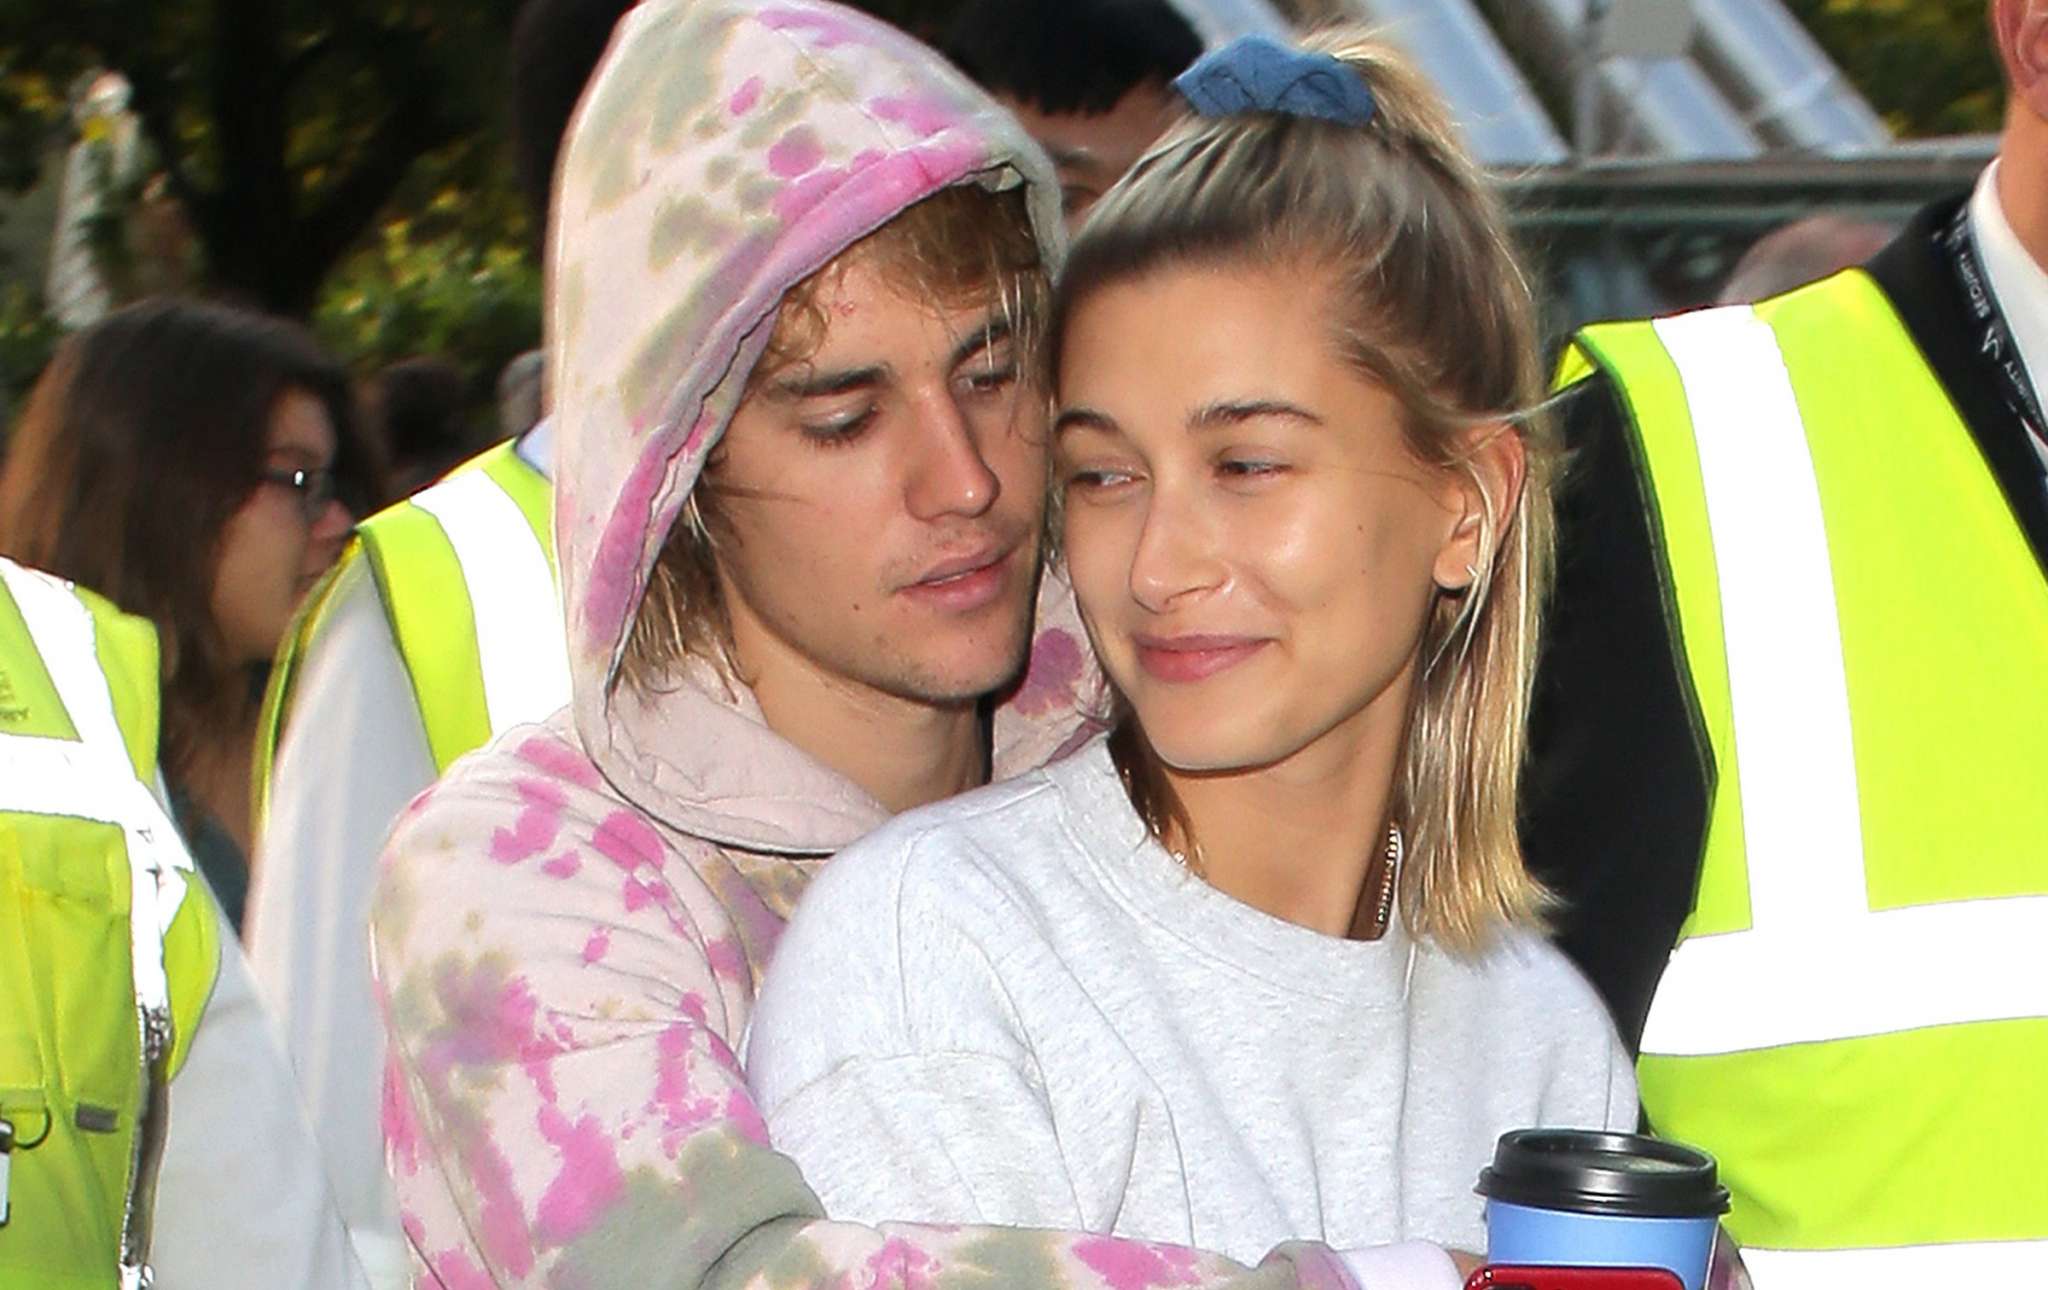 Justin Bieber Writes Wife Hailey Baldwin A Poem – Check It Out! | Celebrity Insider2048 x 1290